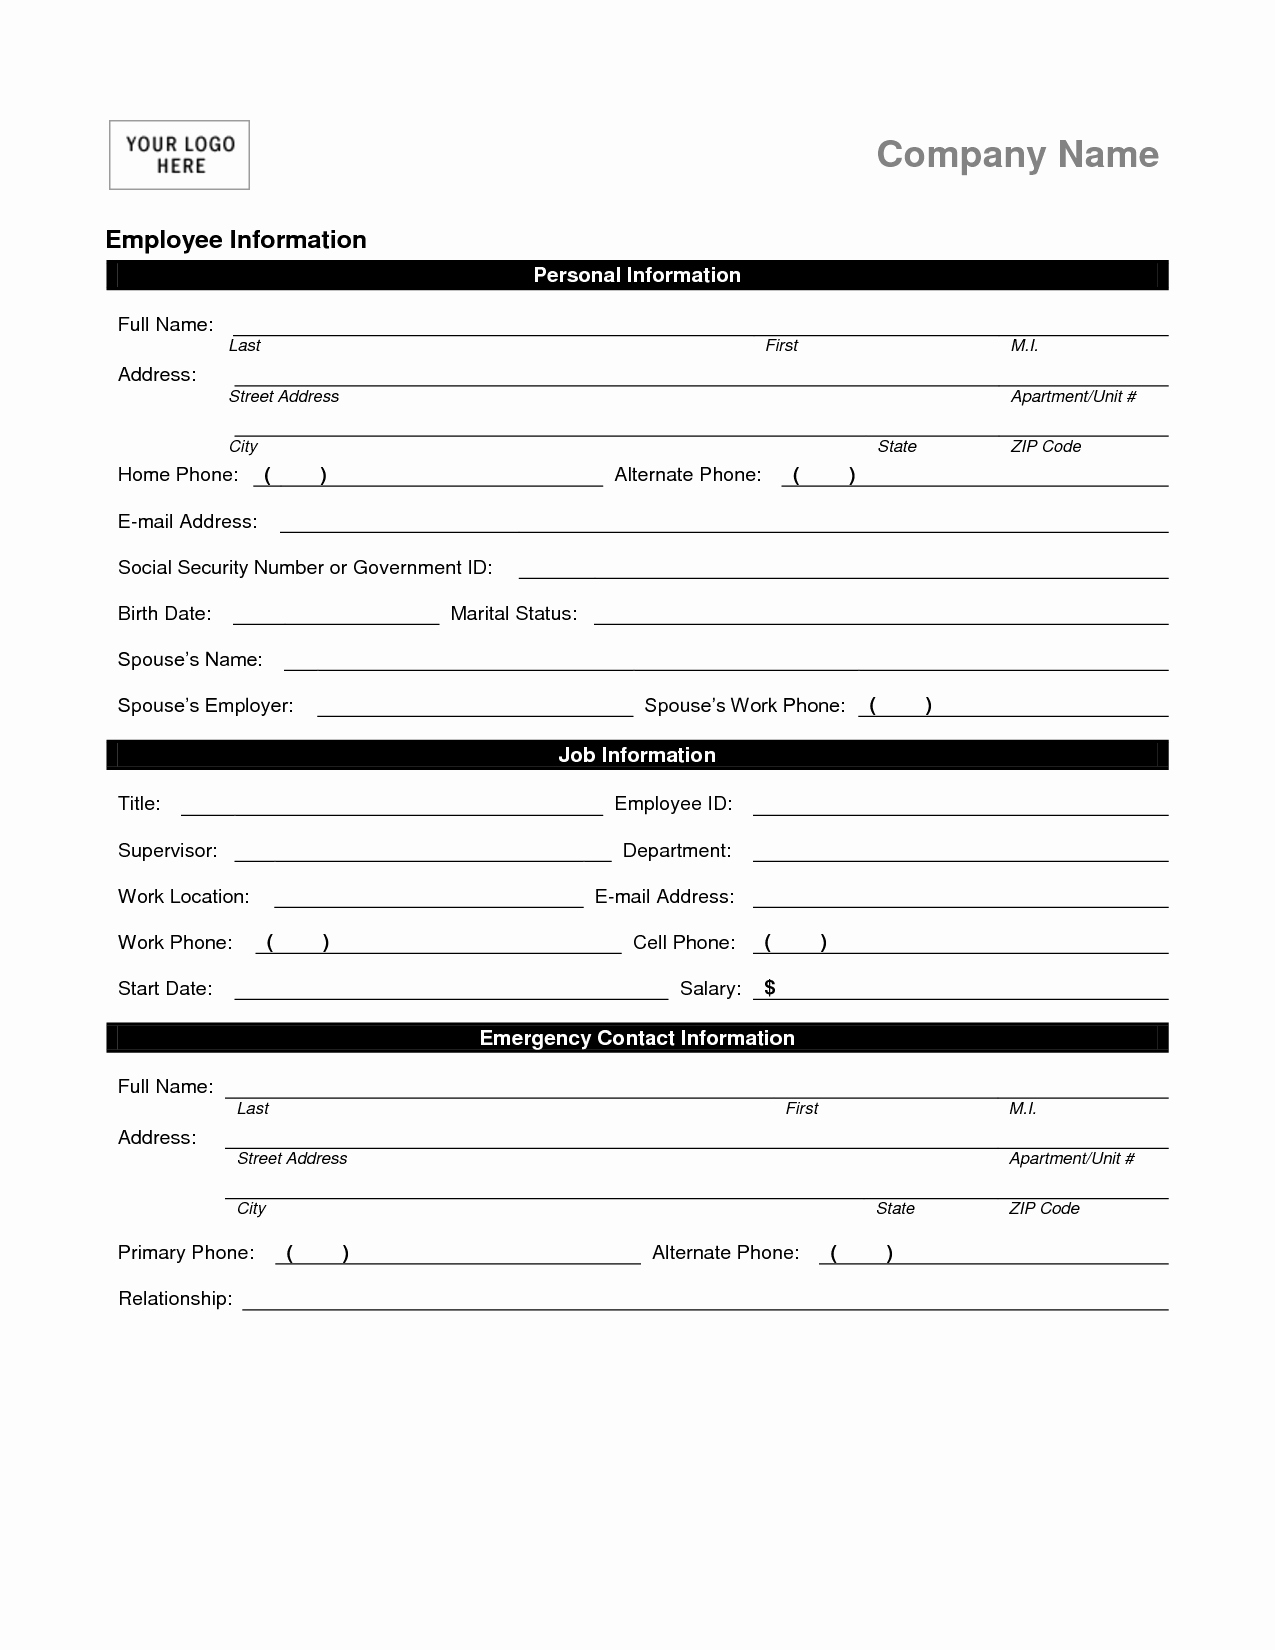 Personal Information form Template New Employee Personal Information form Template